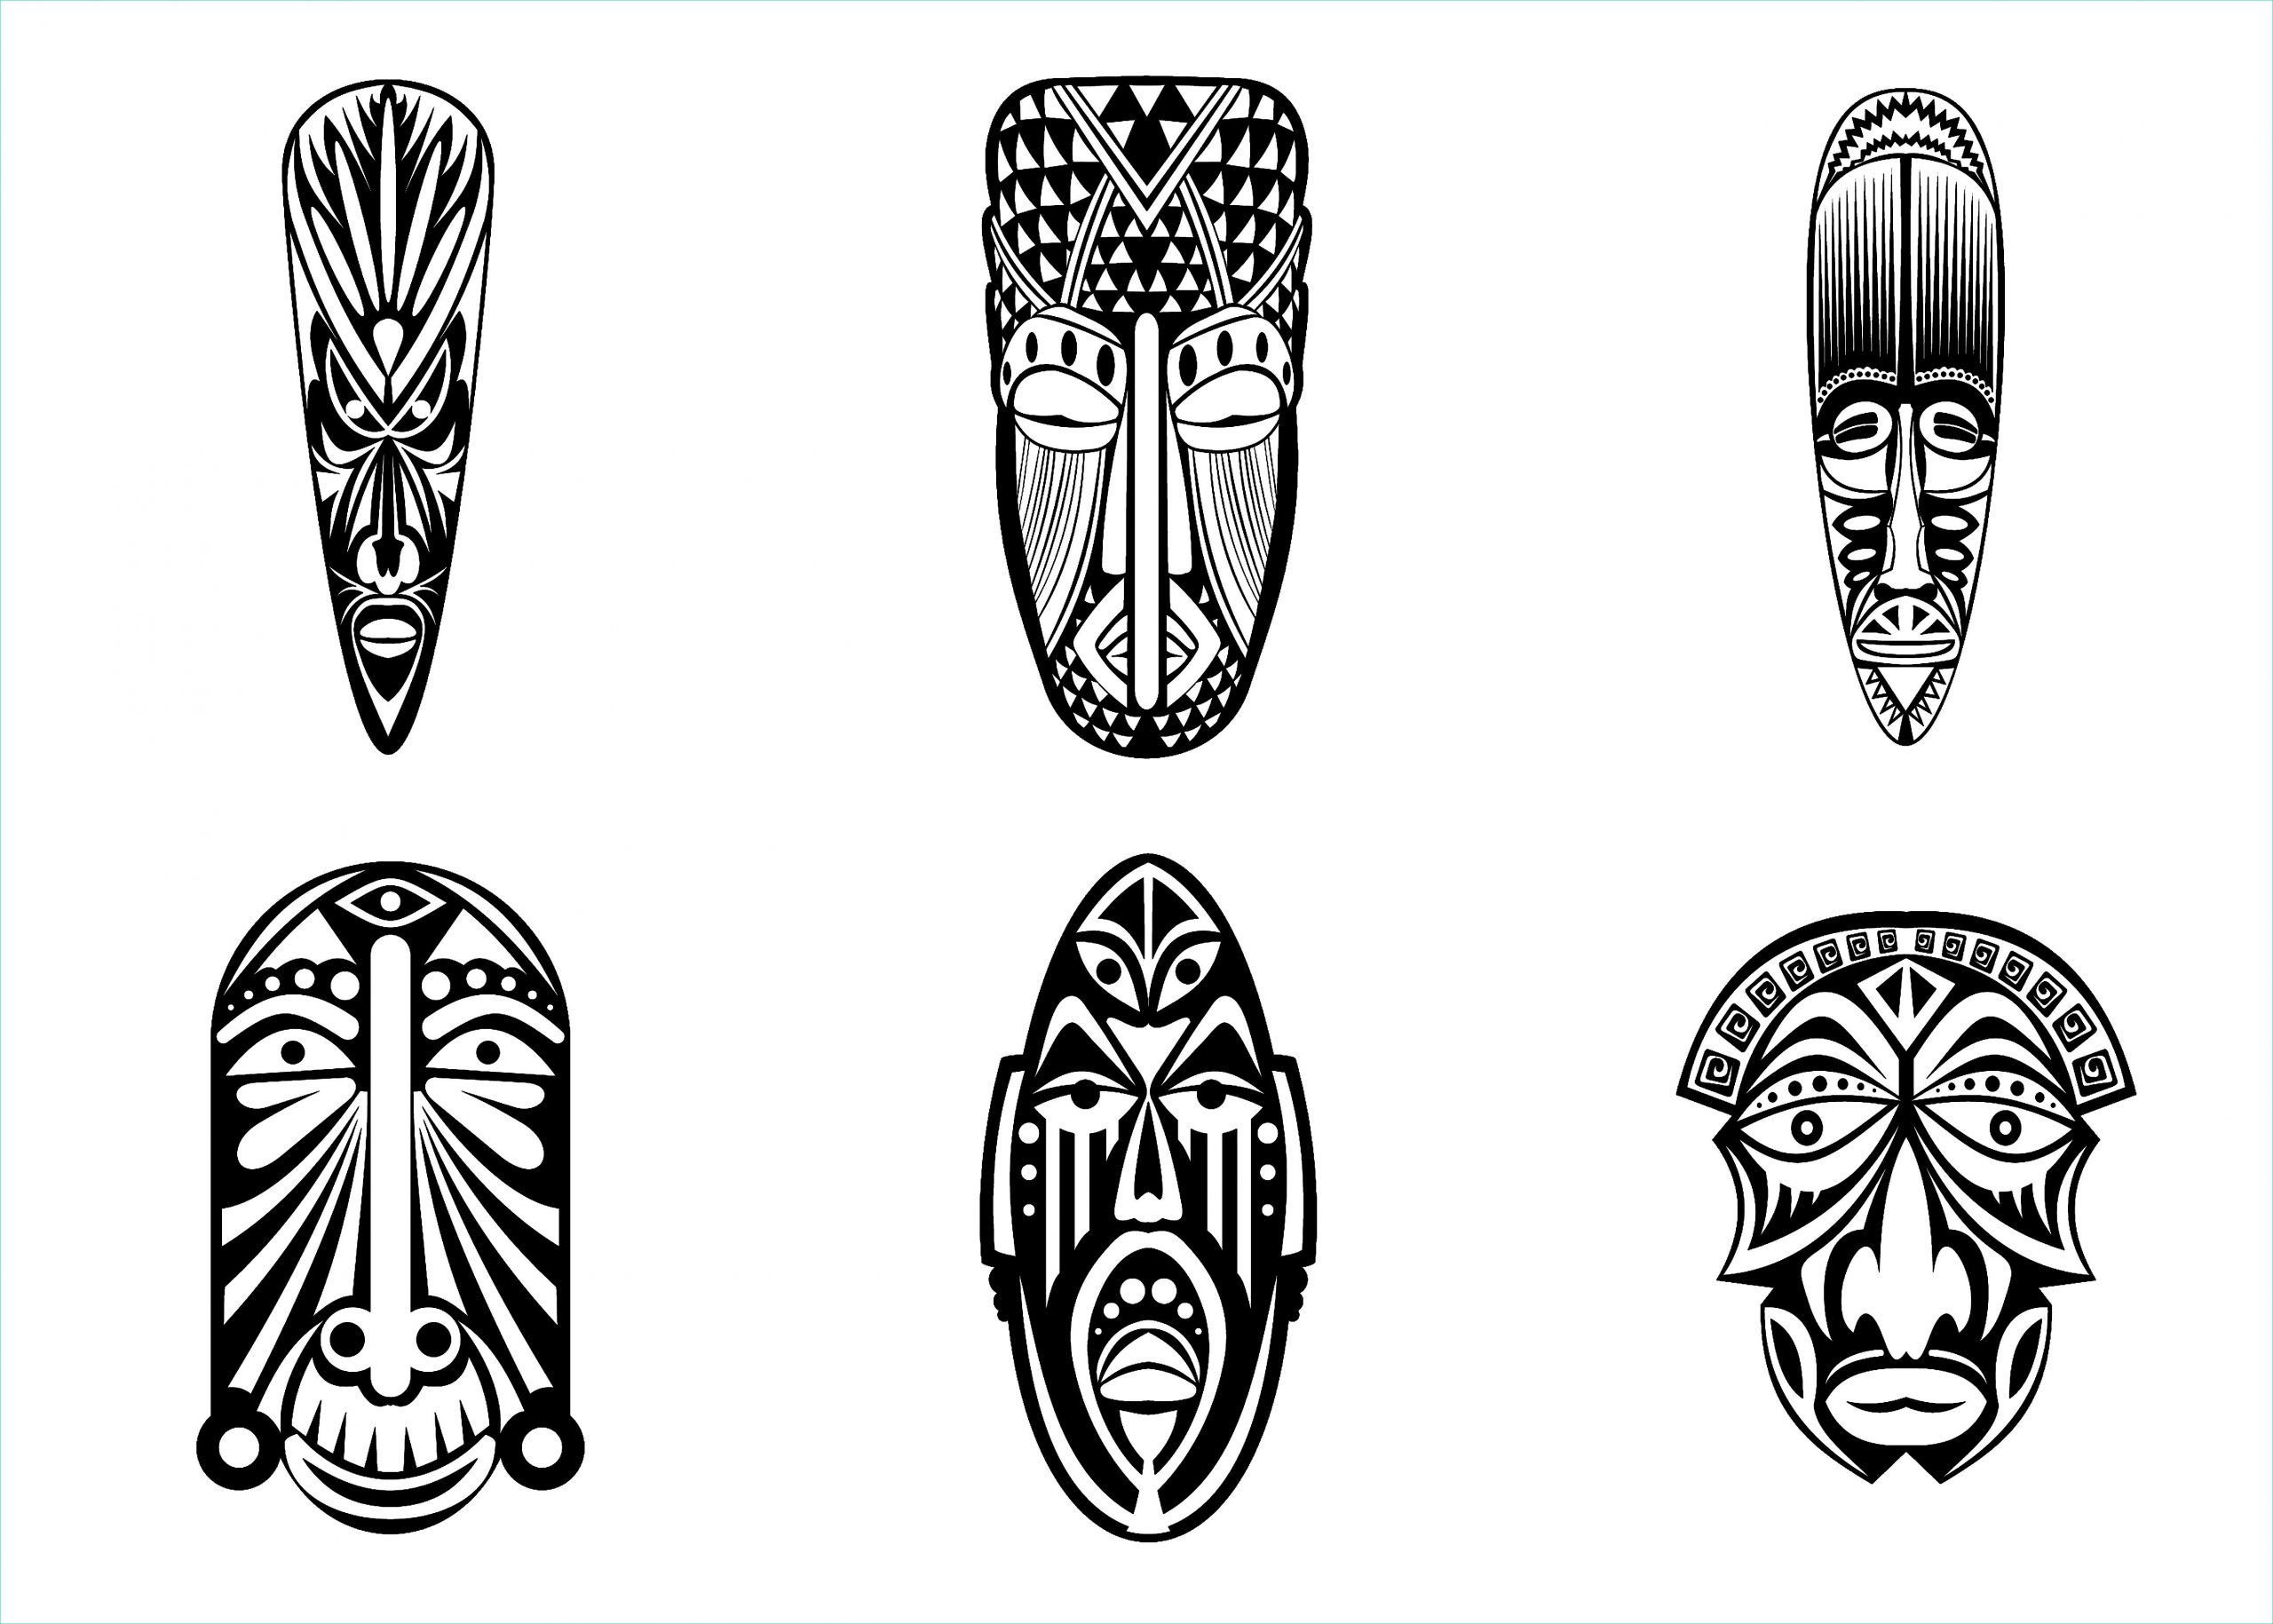 image=masques coloriage 6 masques africains simples 1